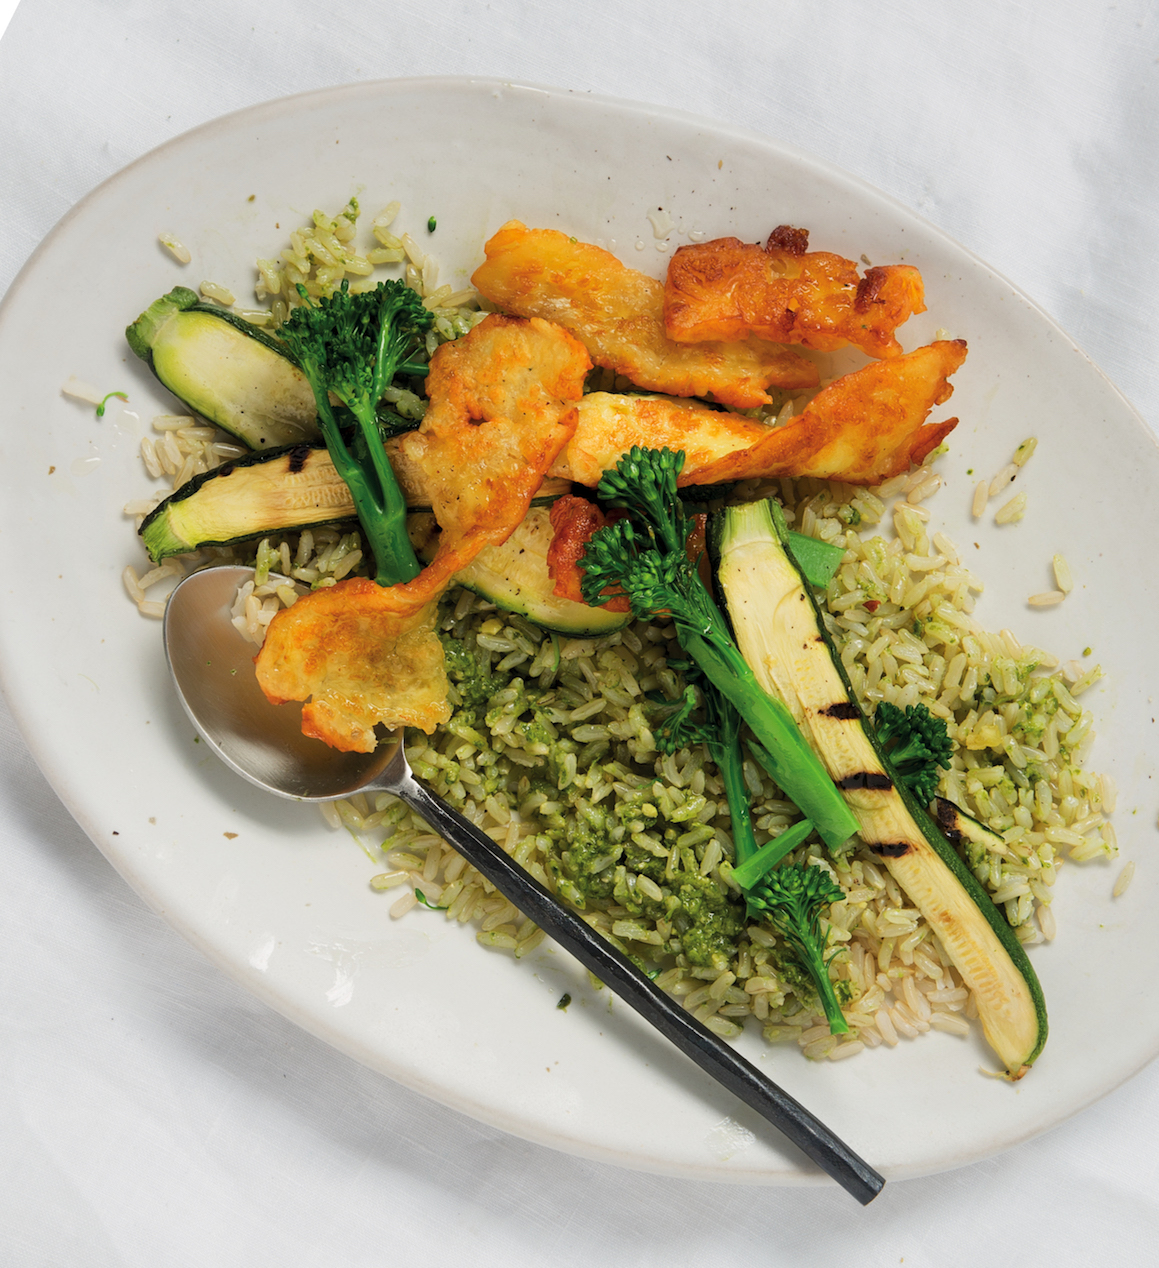 Read more about the article Baby marrow, broccoli and halloumi with pesto rice